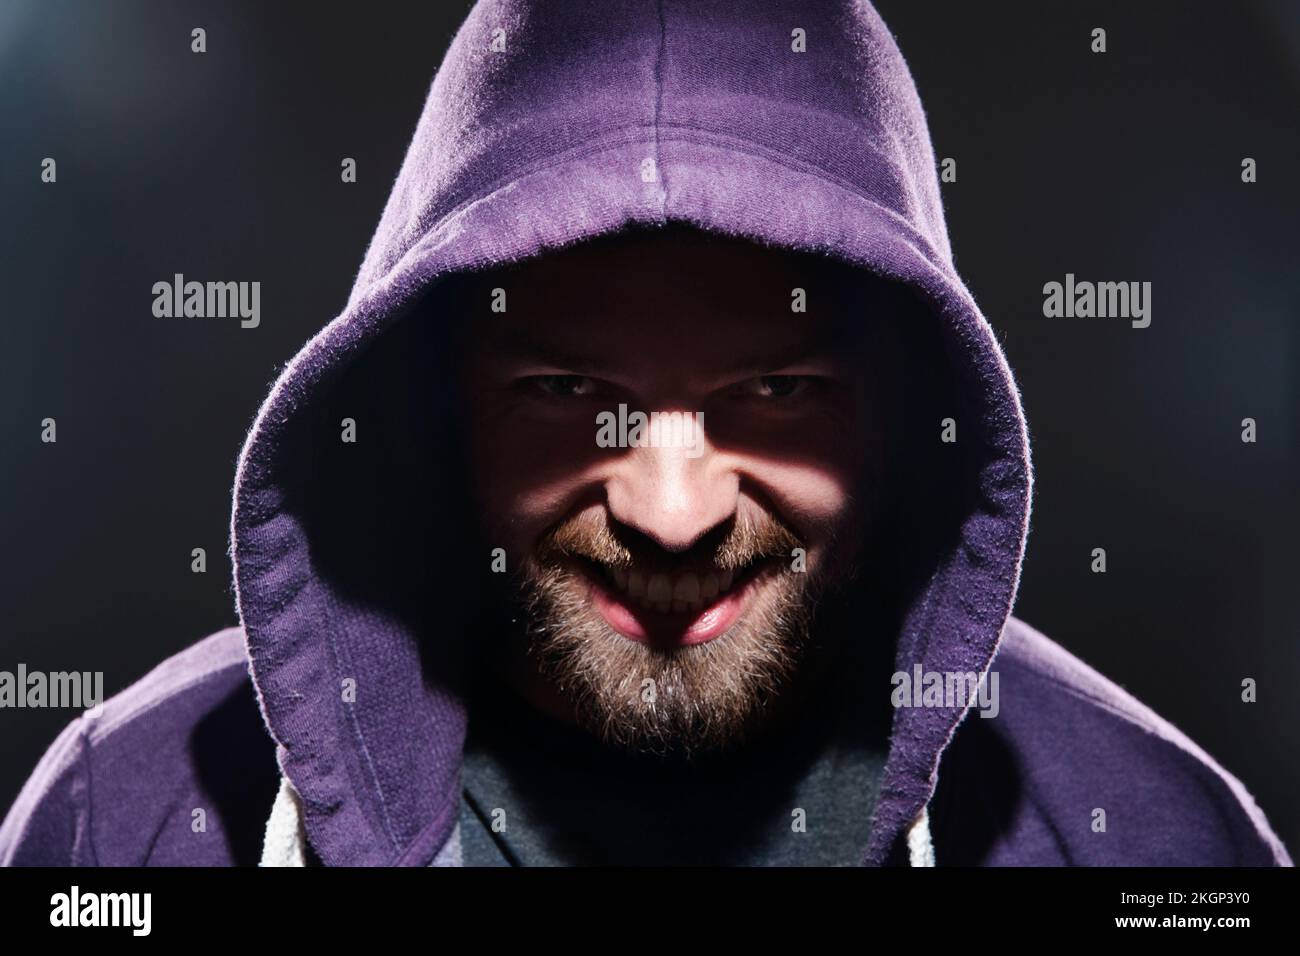 Portrait of man with hooded jacket in front of black background Stock Photo